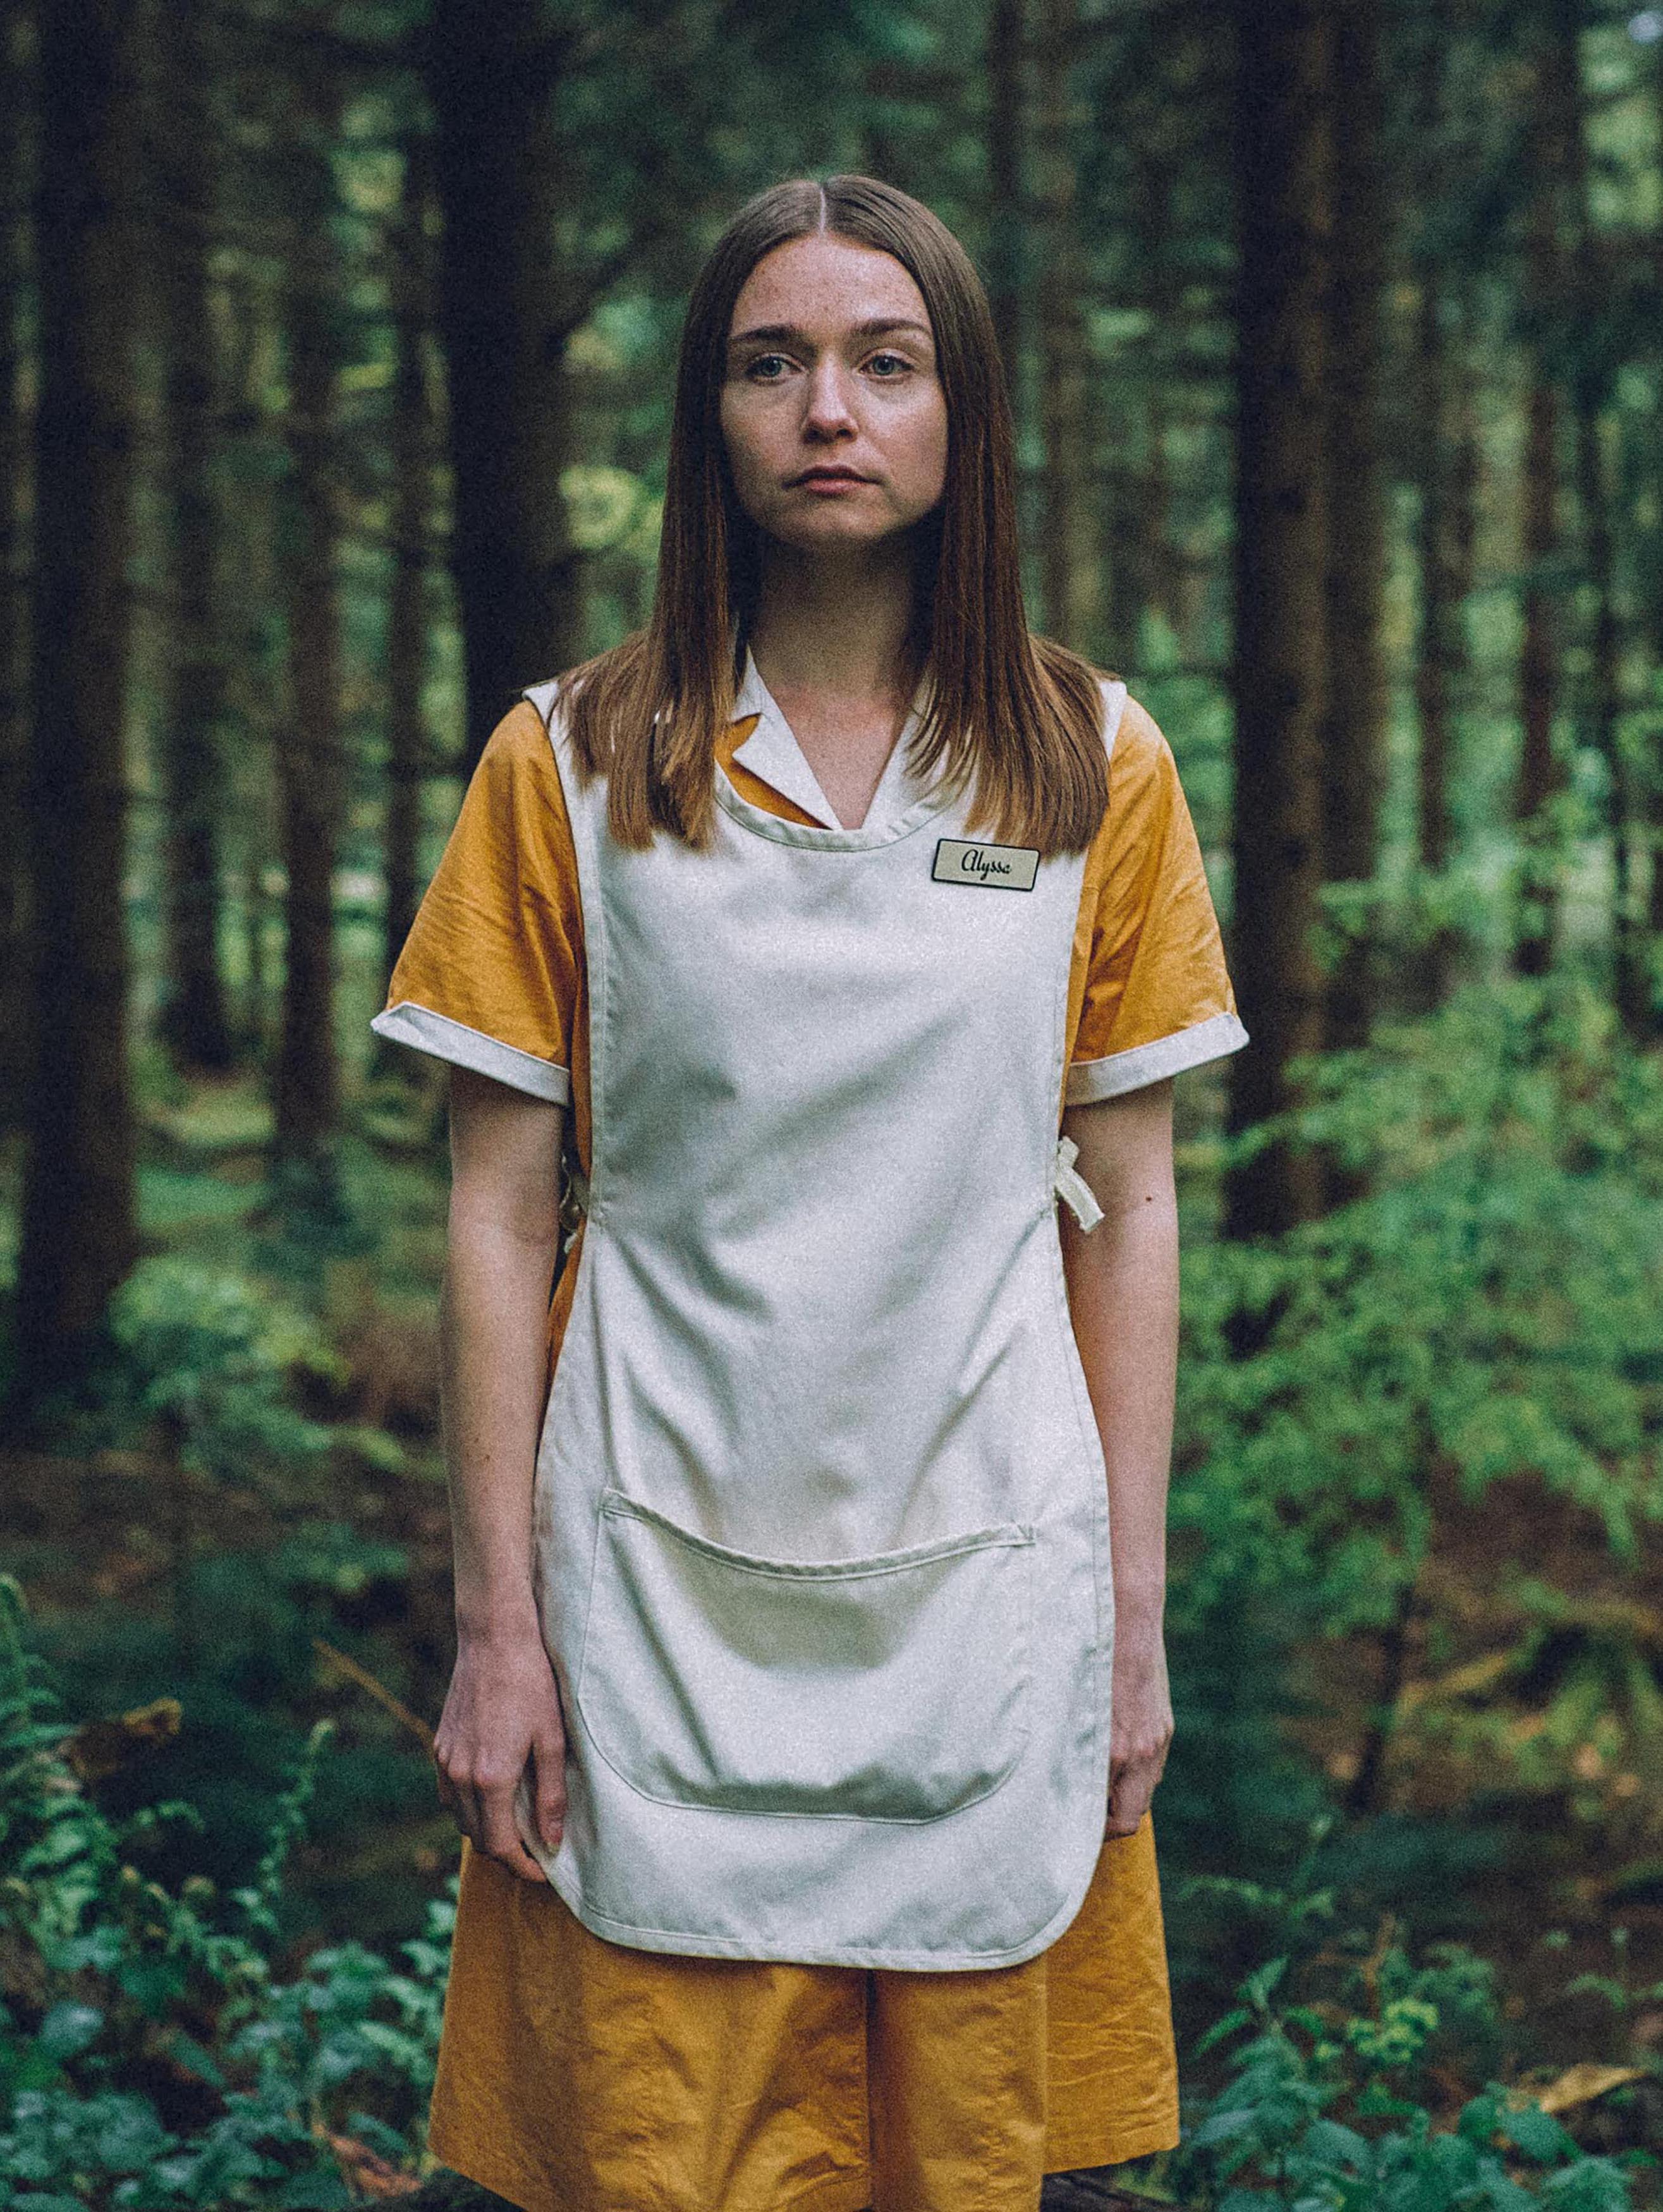 The End Of The F***ing World: Series 2